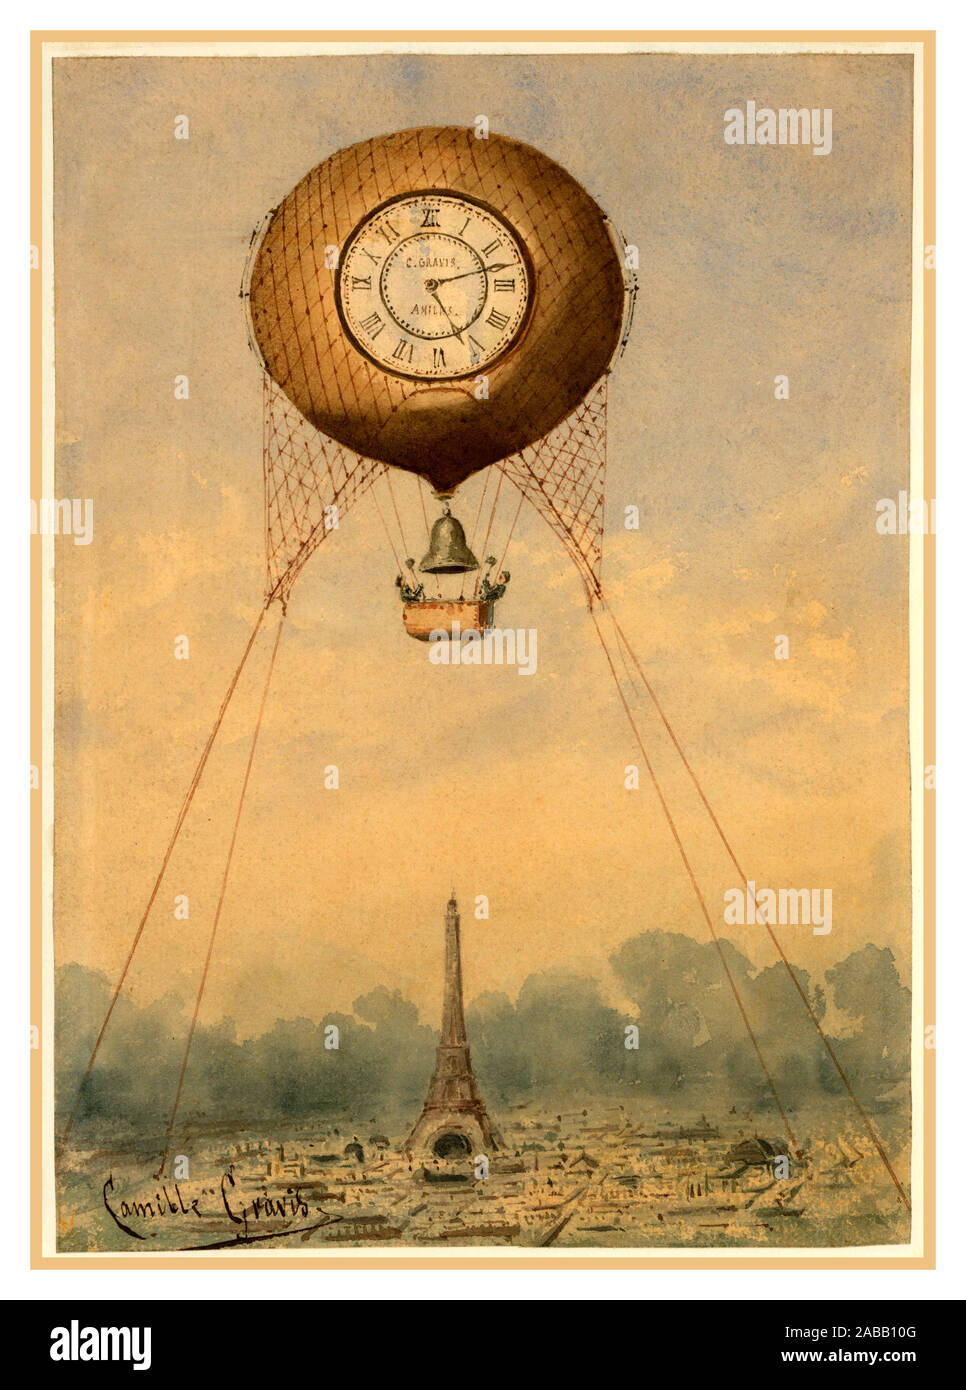 1889 Paris Exposition Vintage Hot Air Balloon Captive balloon with clock face and bell, floating above the Eiffel Tower, Paris, France by Camille Grávis., balloon hot air balloon paris,  france,  historic, drawing, illustration, poster, world exposition clock promotion Paris Stock Photo